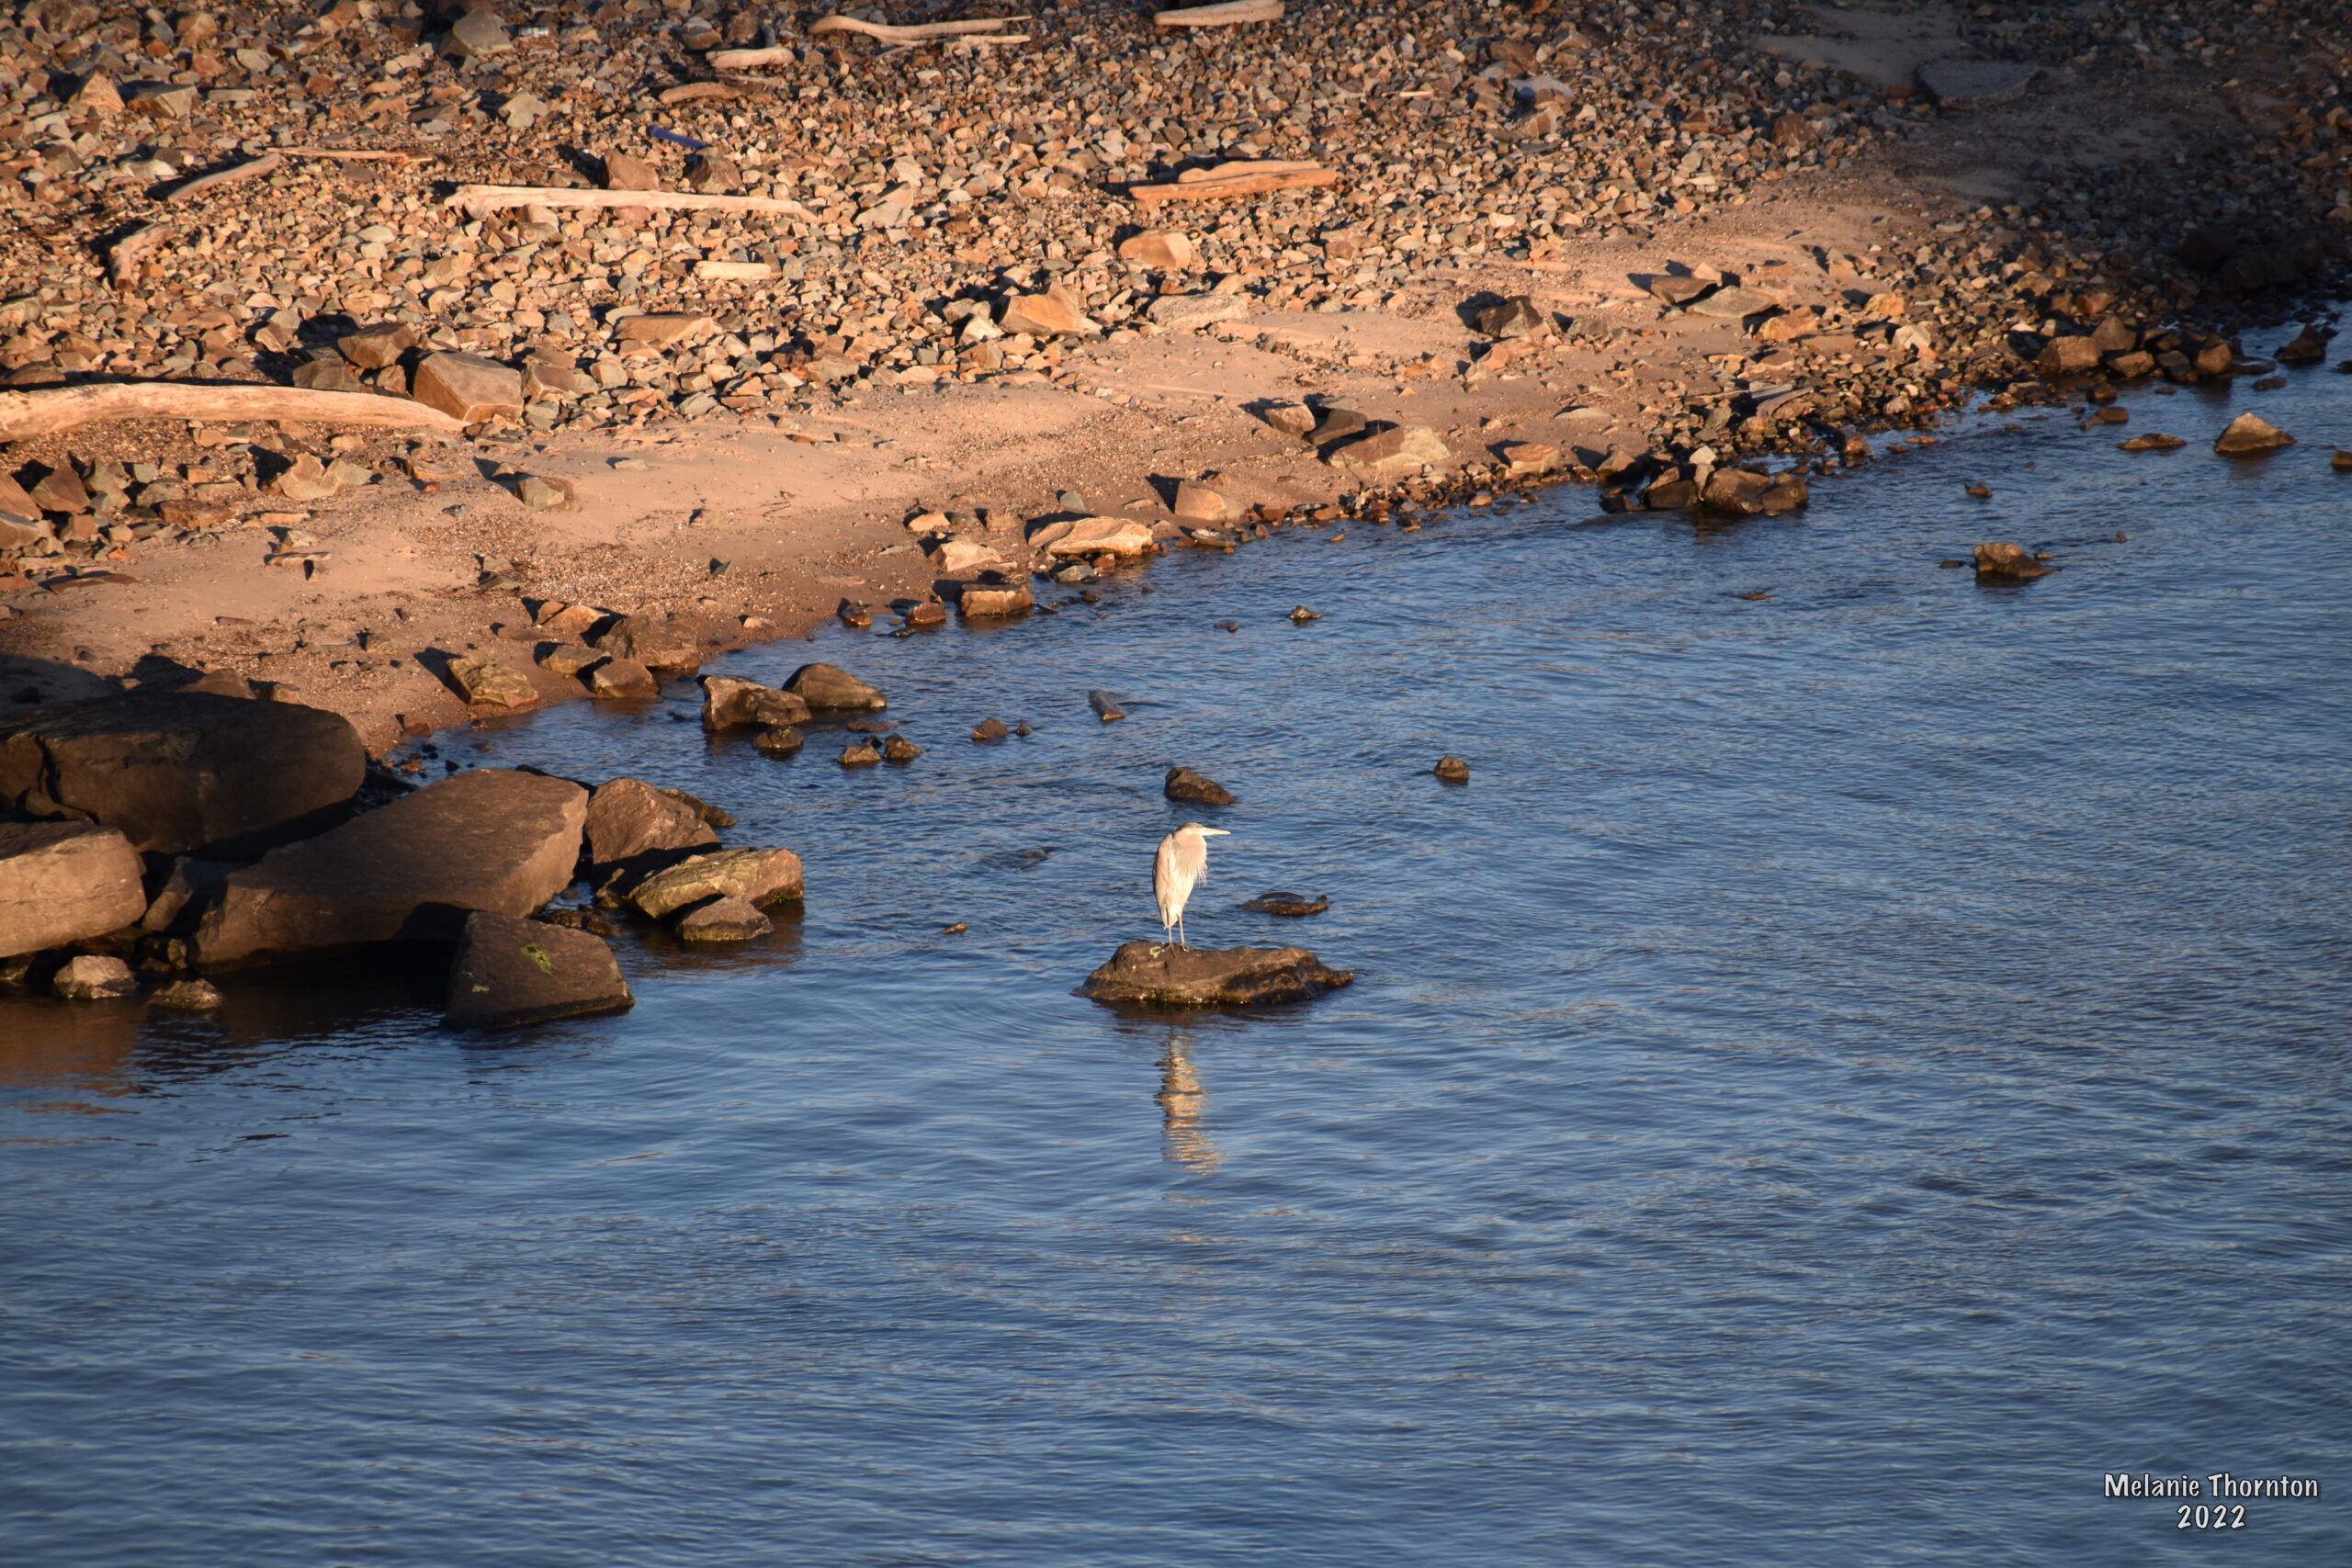 A large light grey bird with long legs and a long beak stands on a rock not far from the shore of a body of water. Its reflection is seen below it.